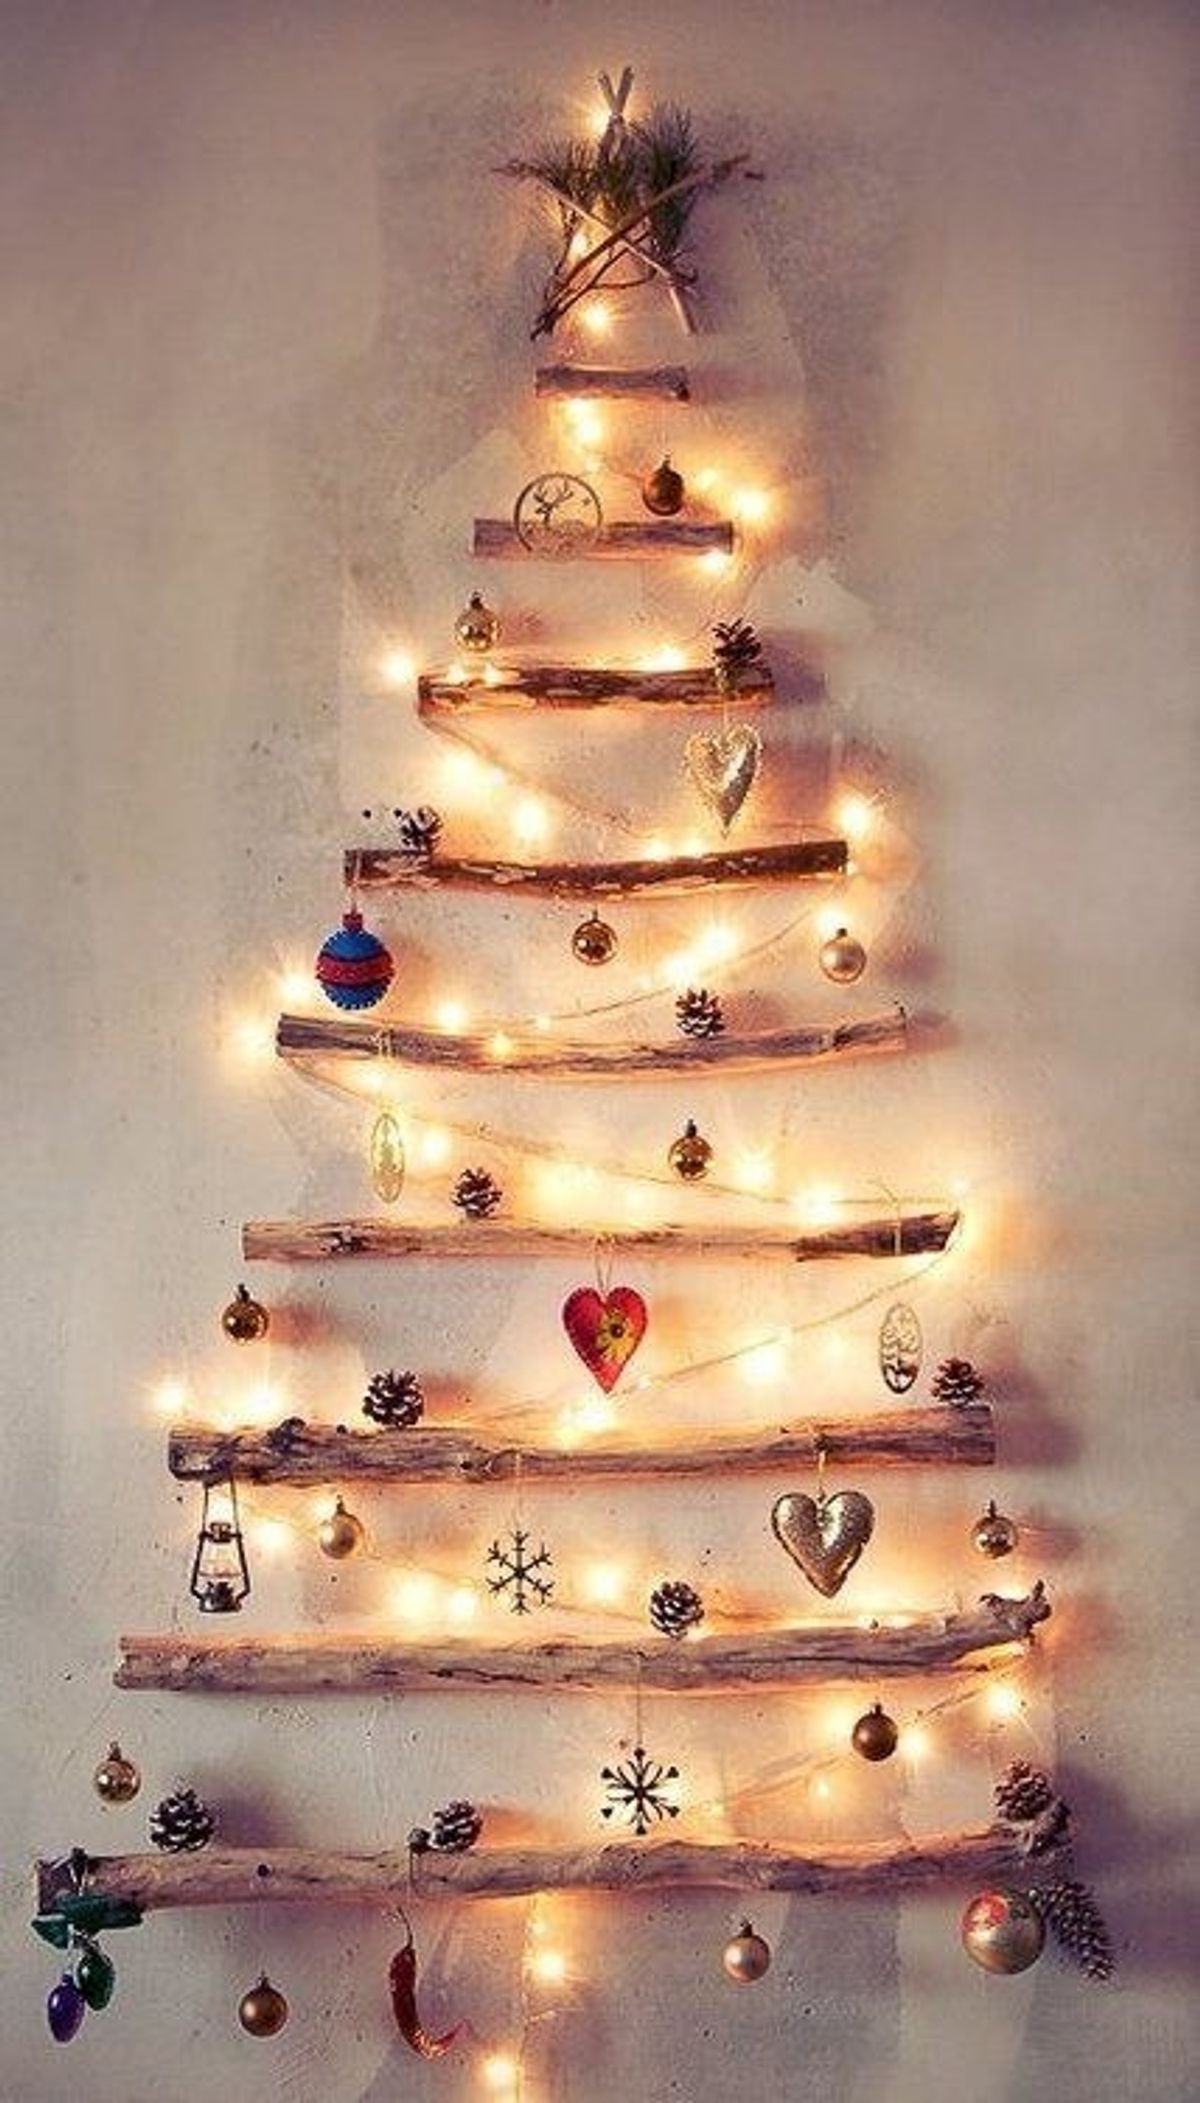 7 Ways To Make A Christmas Tree Without Buying One